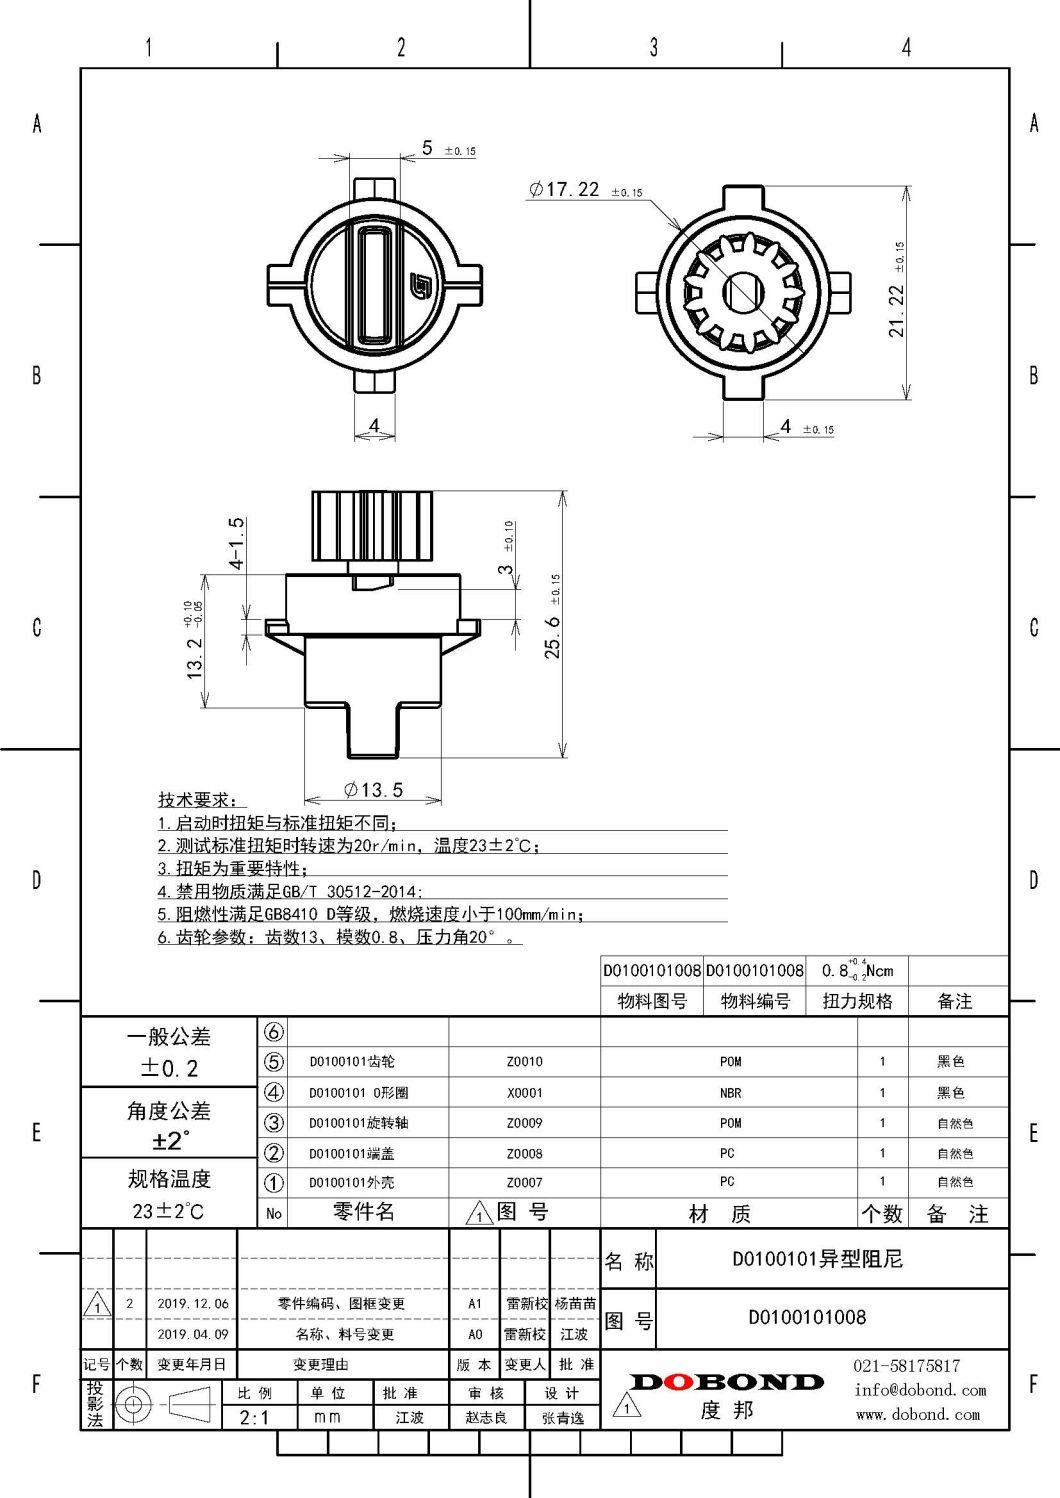 Hydraulic Damper Large Rotational Damper with Pinion Gear